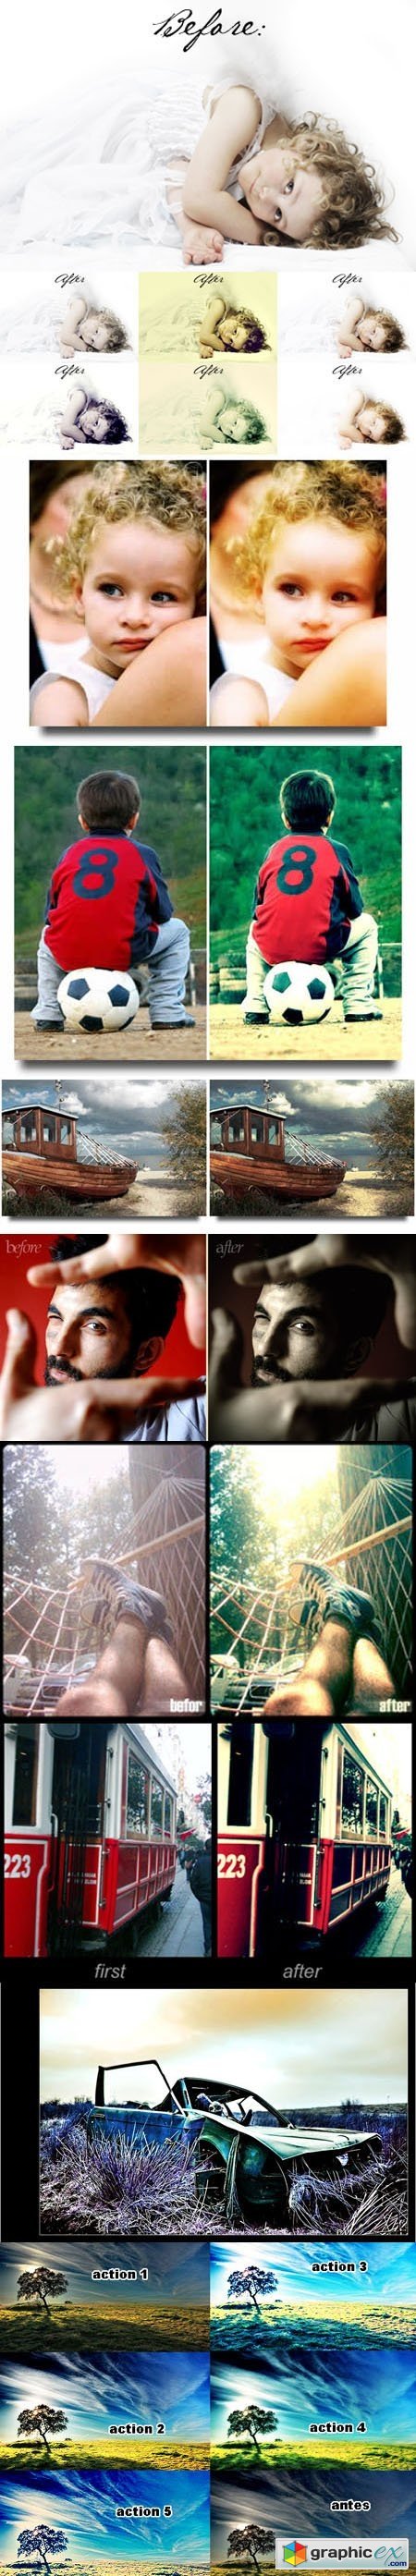 OLD & Brilliant Photoshop Actions